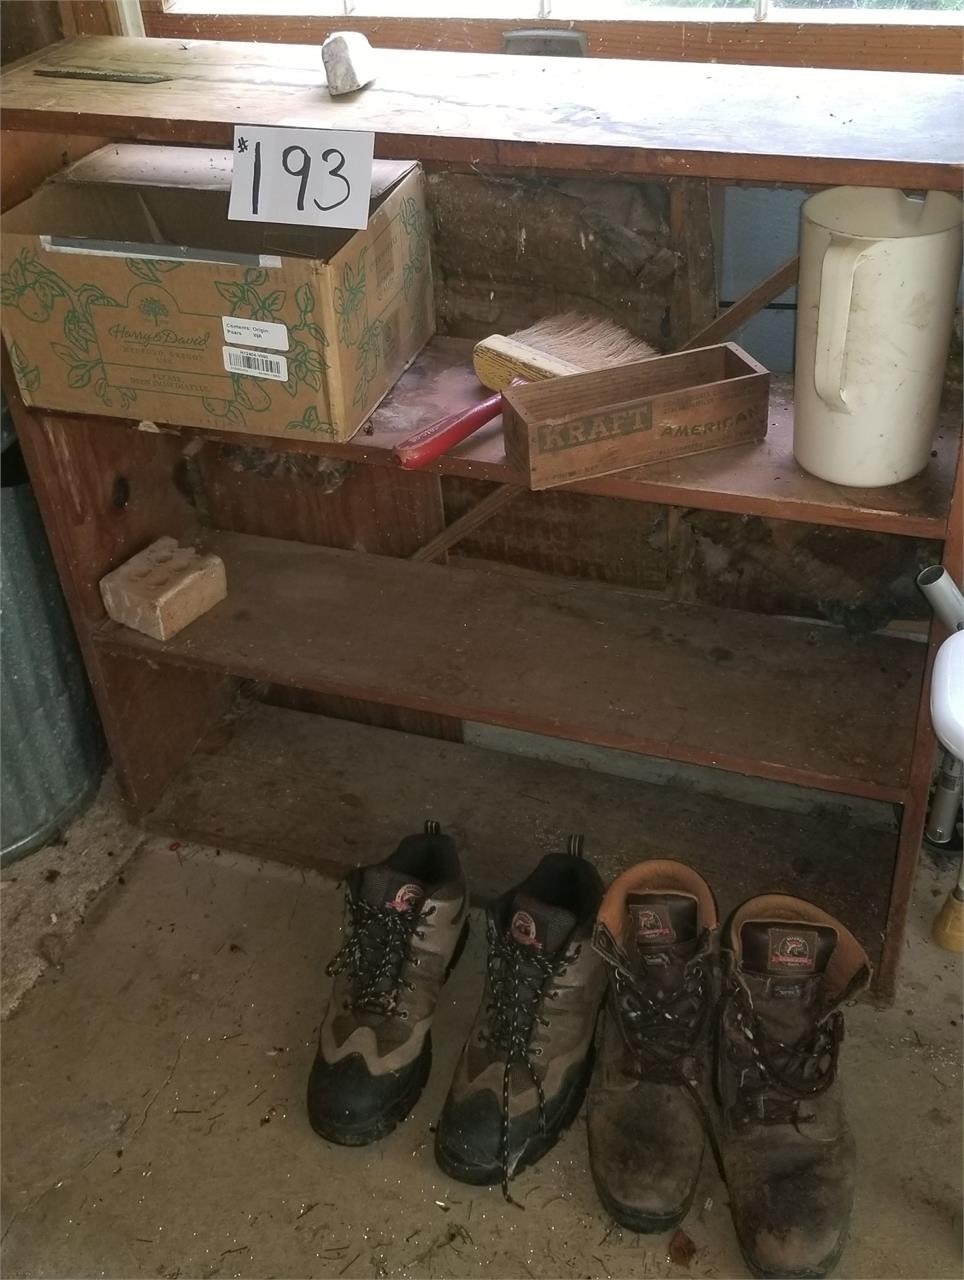 Wood Shelves & Contents, Steel Toe Boots Size 13